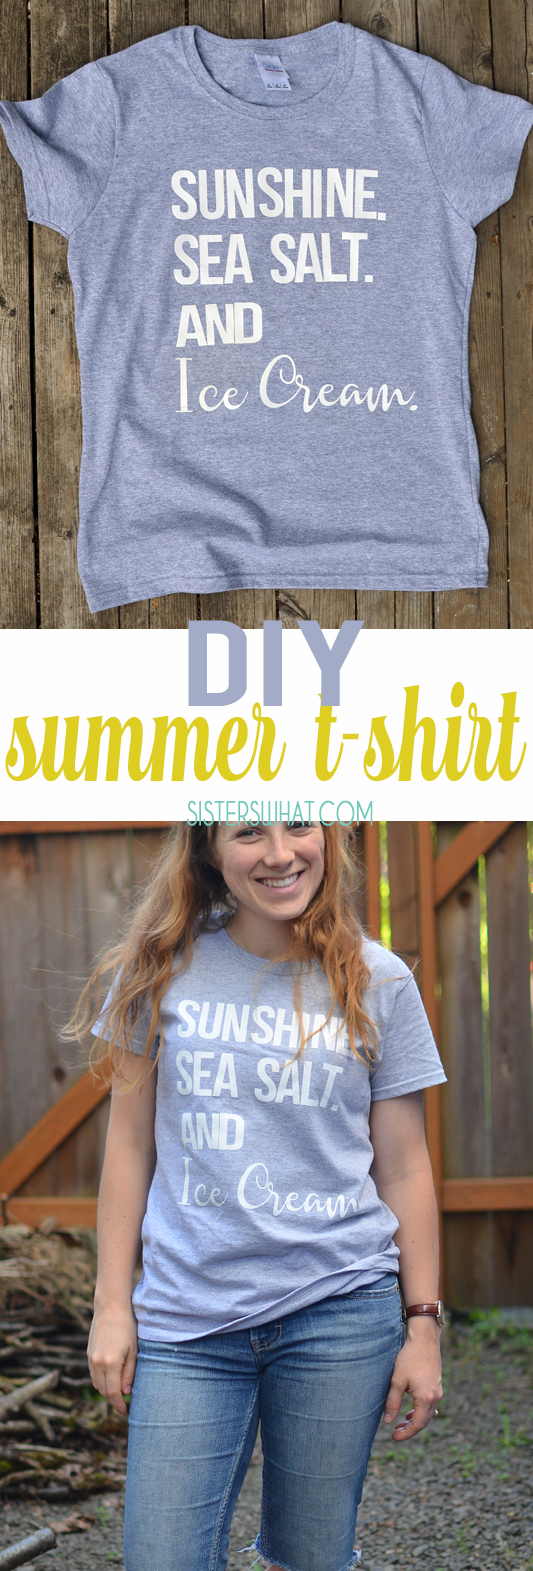 the perfect summer t - make your own summer t shirt using heat transfer vinyl letters (no cutting machine needed). Perfect beach shirt 